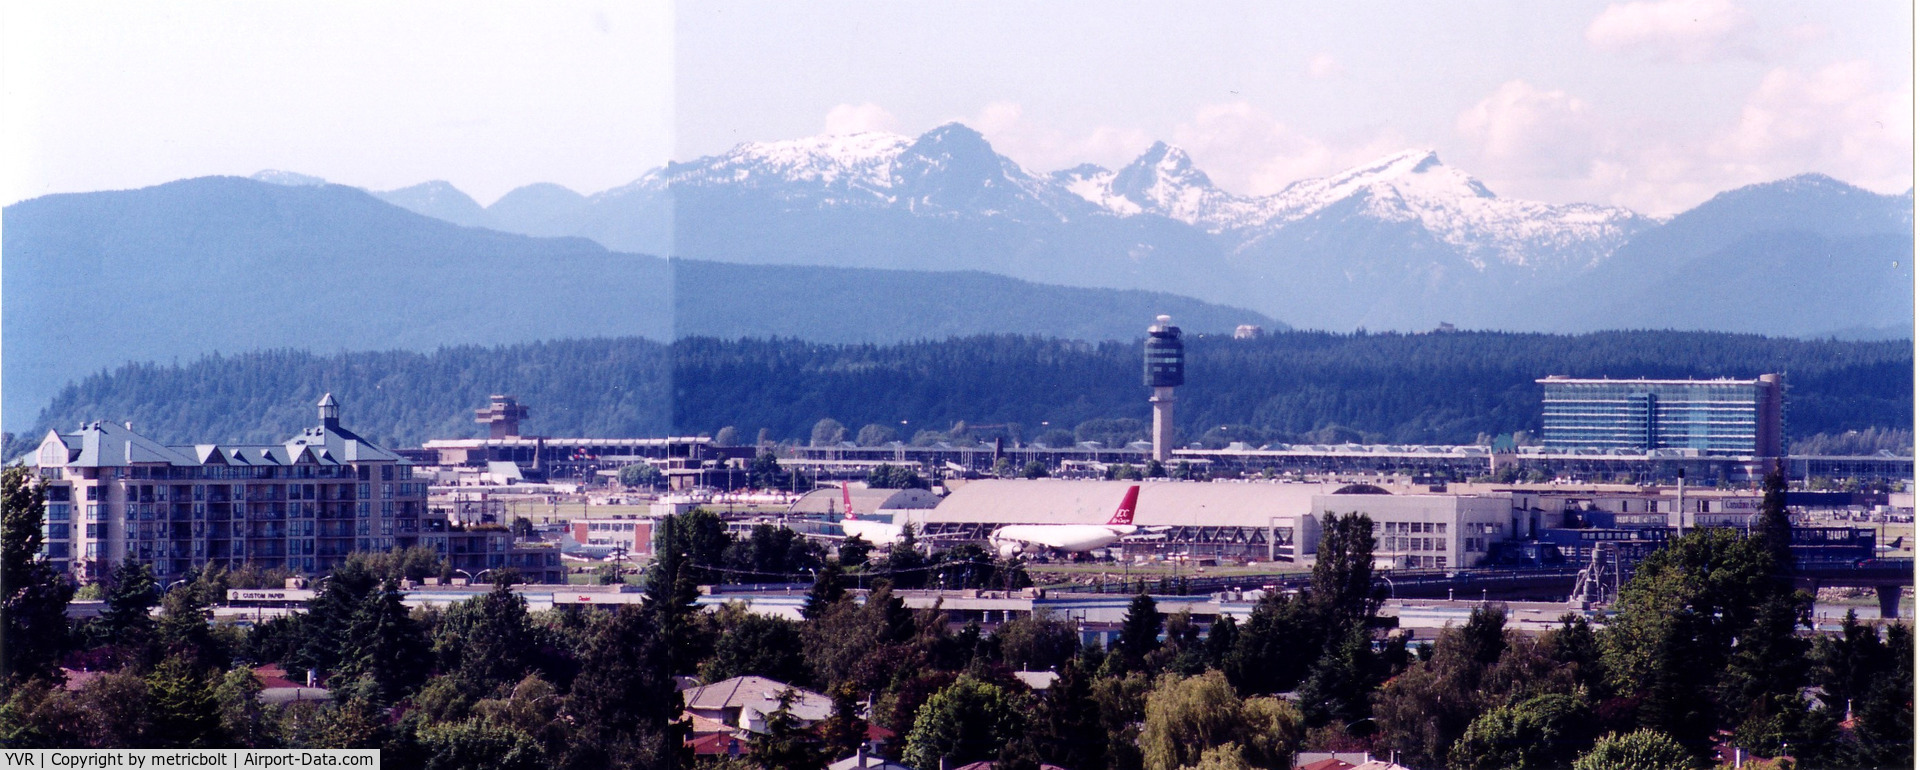 Vancouver International Airport, Vancouver, British Columbia Canada (YVR) - Vancouver Int'l Airport in Jun.2000